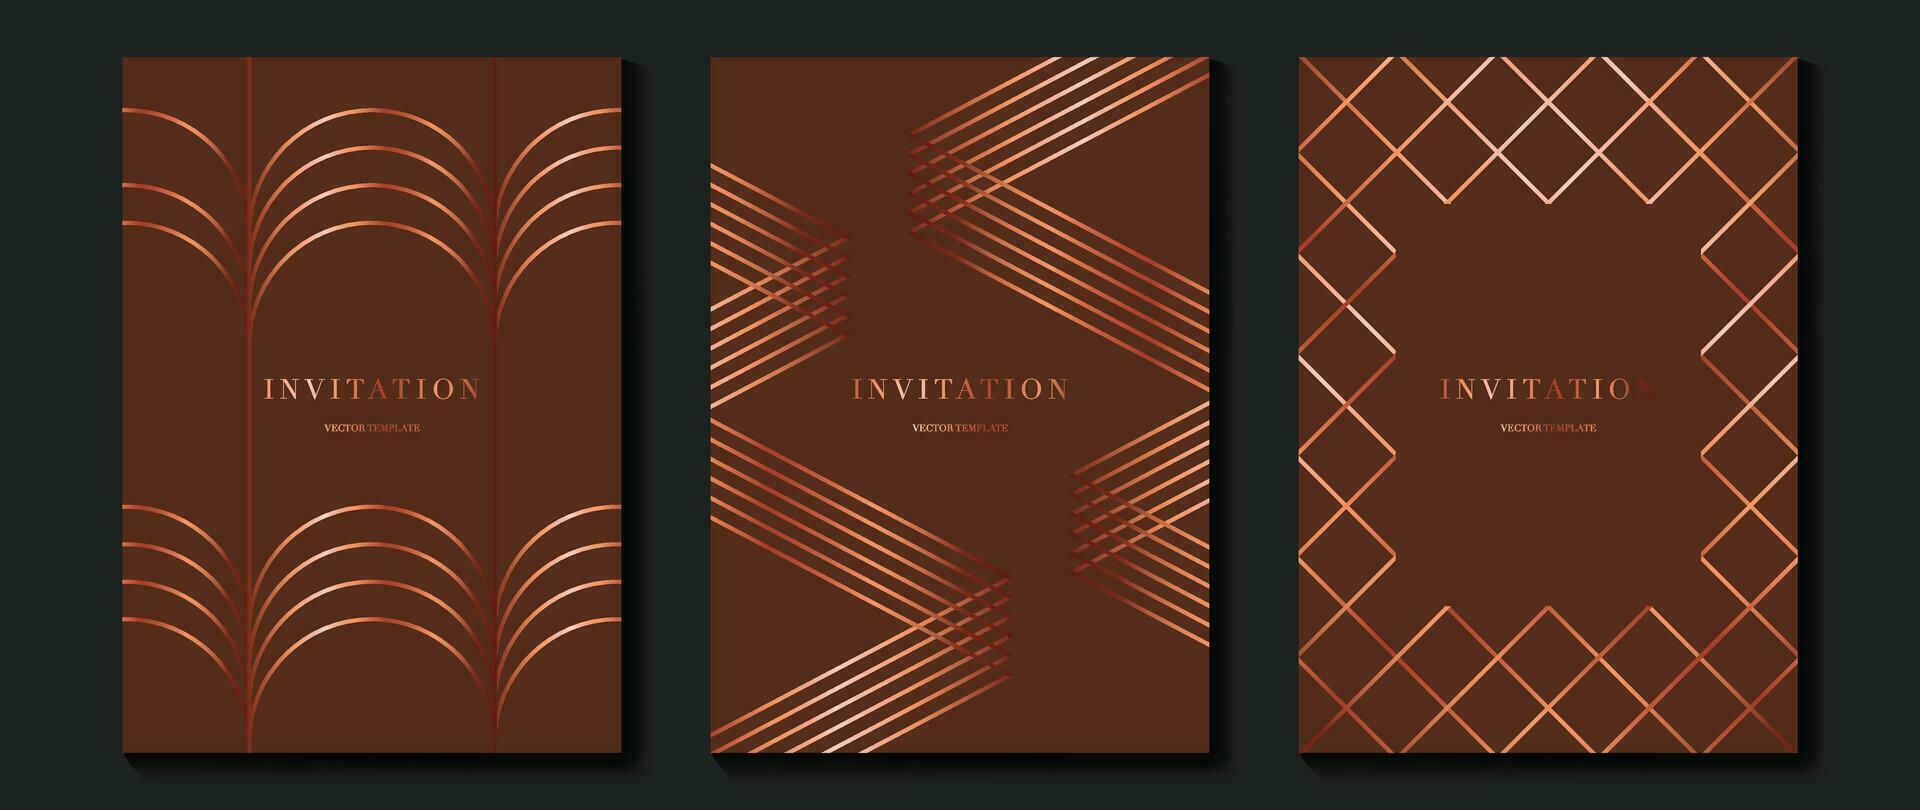 Luxury invitation card background vector. Golden elegant geometric shape, gold lines gradient on brown background. Premium design illustration for gala card, grand opening, party invitation, wedding. vector